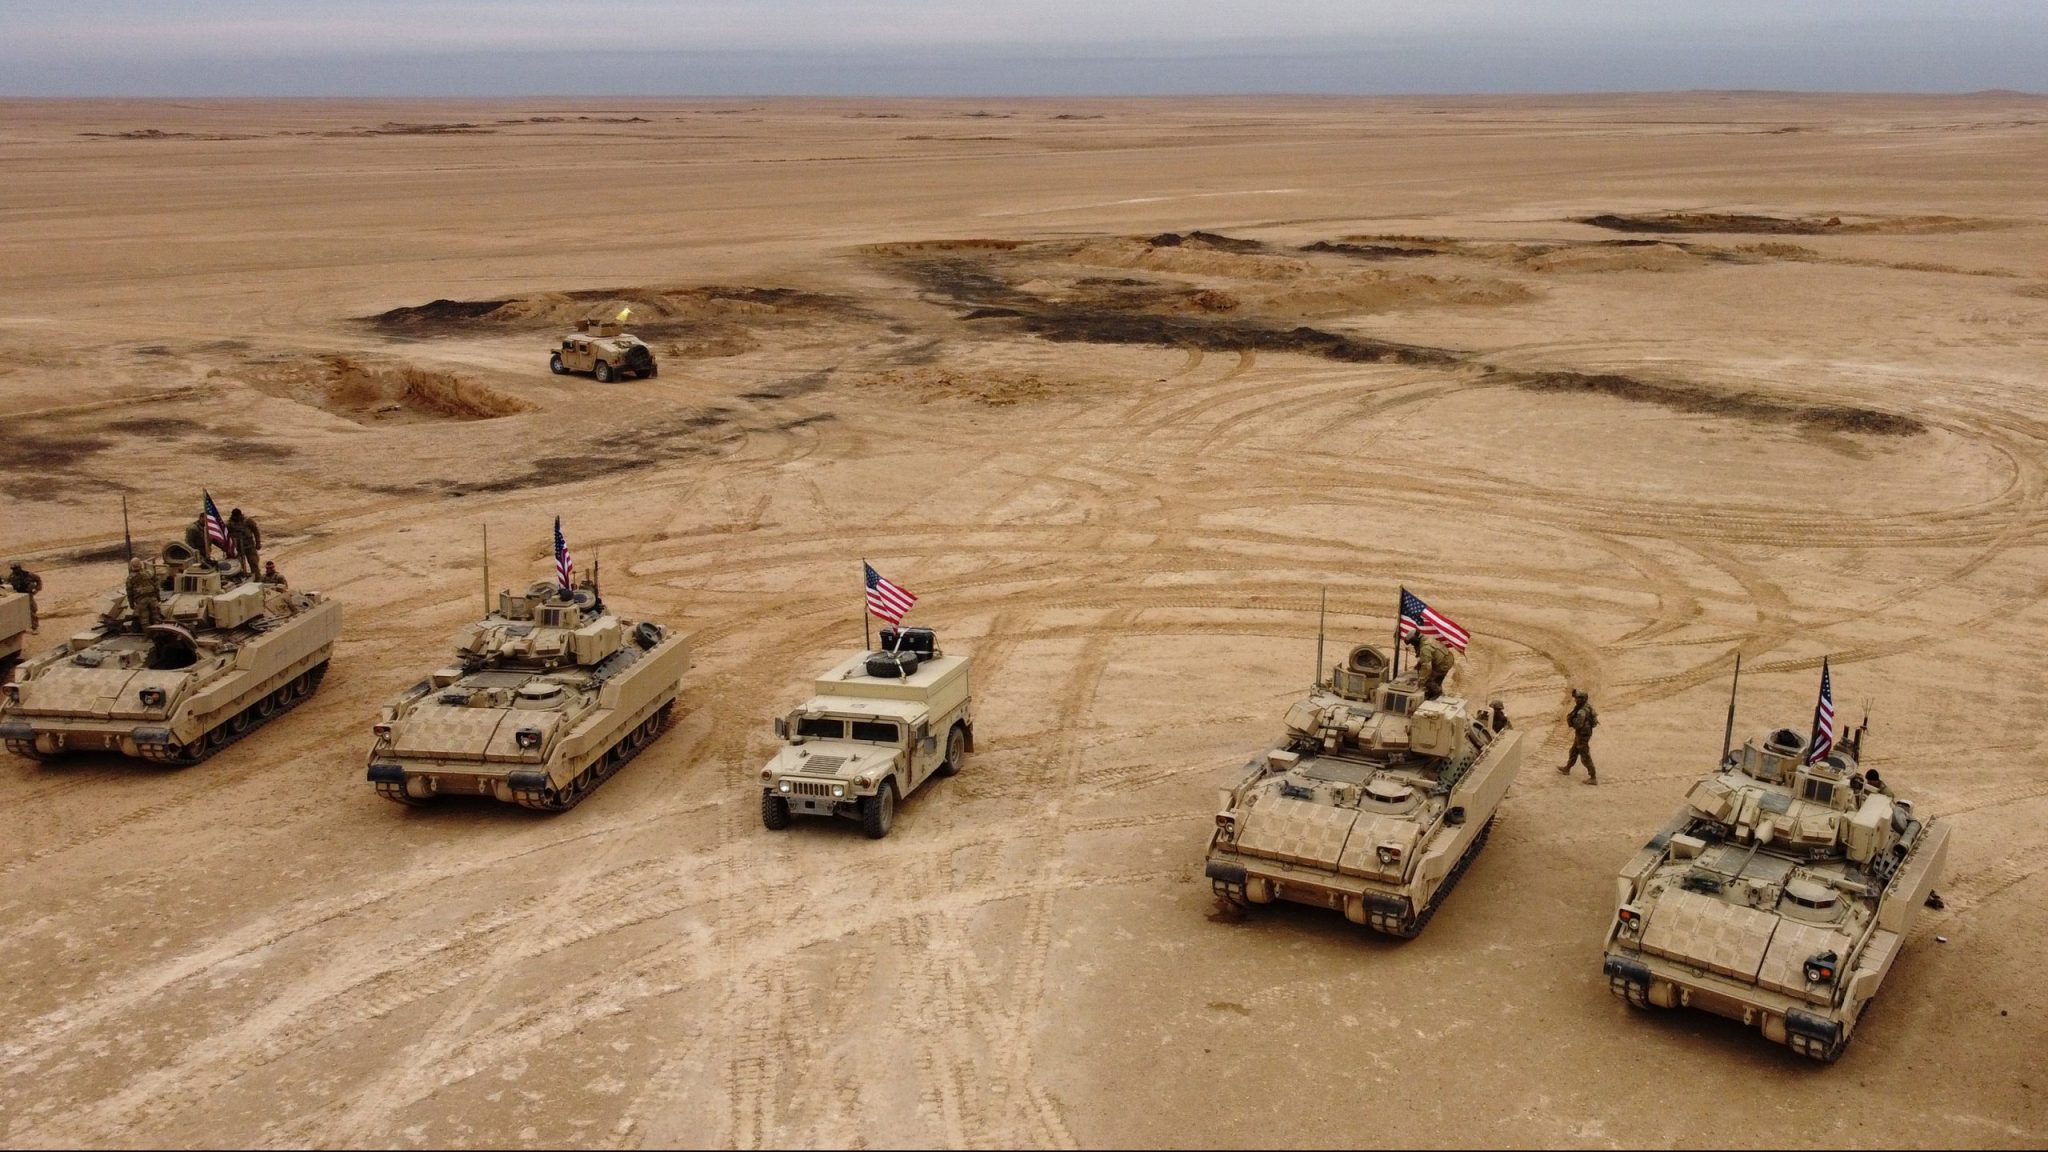 Aerial view of US Bradley Fighting Vehicles (BFV) during a joint military exercise between the Syrian Democratic Forces (SDF) and the US-led international coalition against the Islamic State (IS) group, in the countryside of Deir-ez-Zor